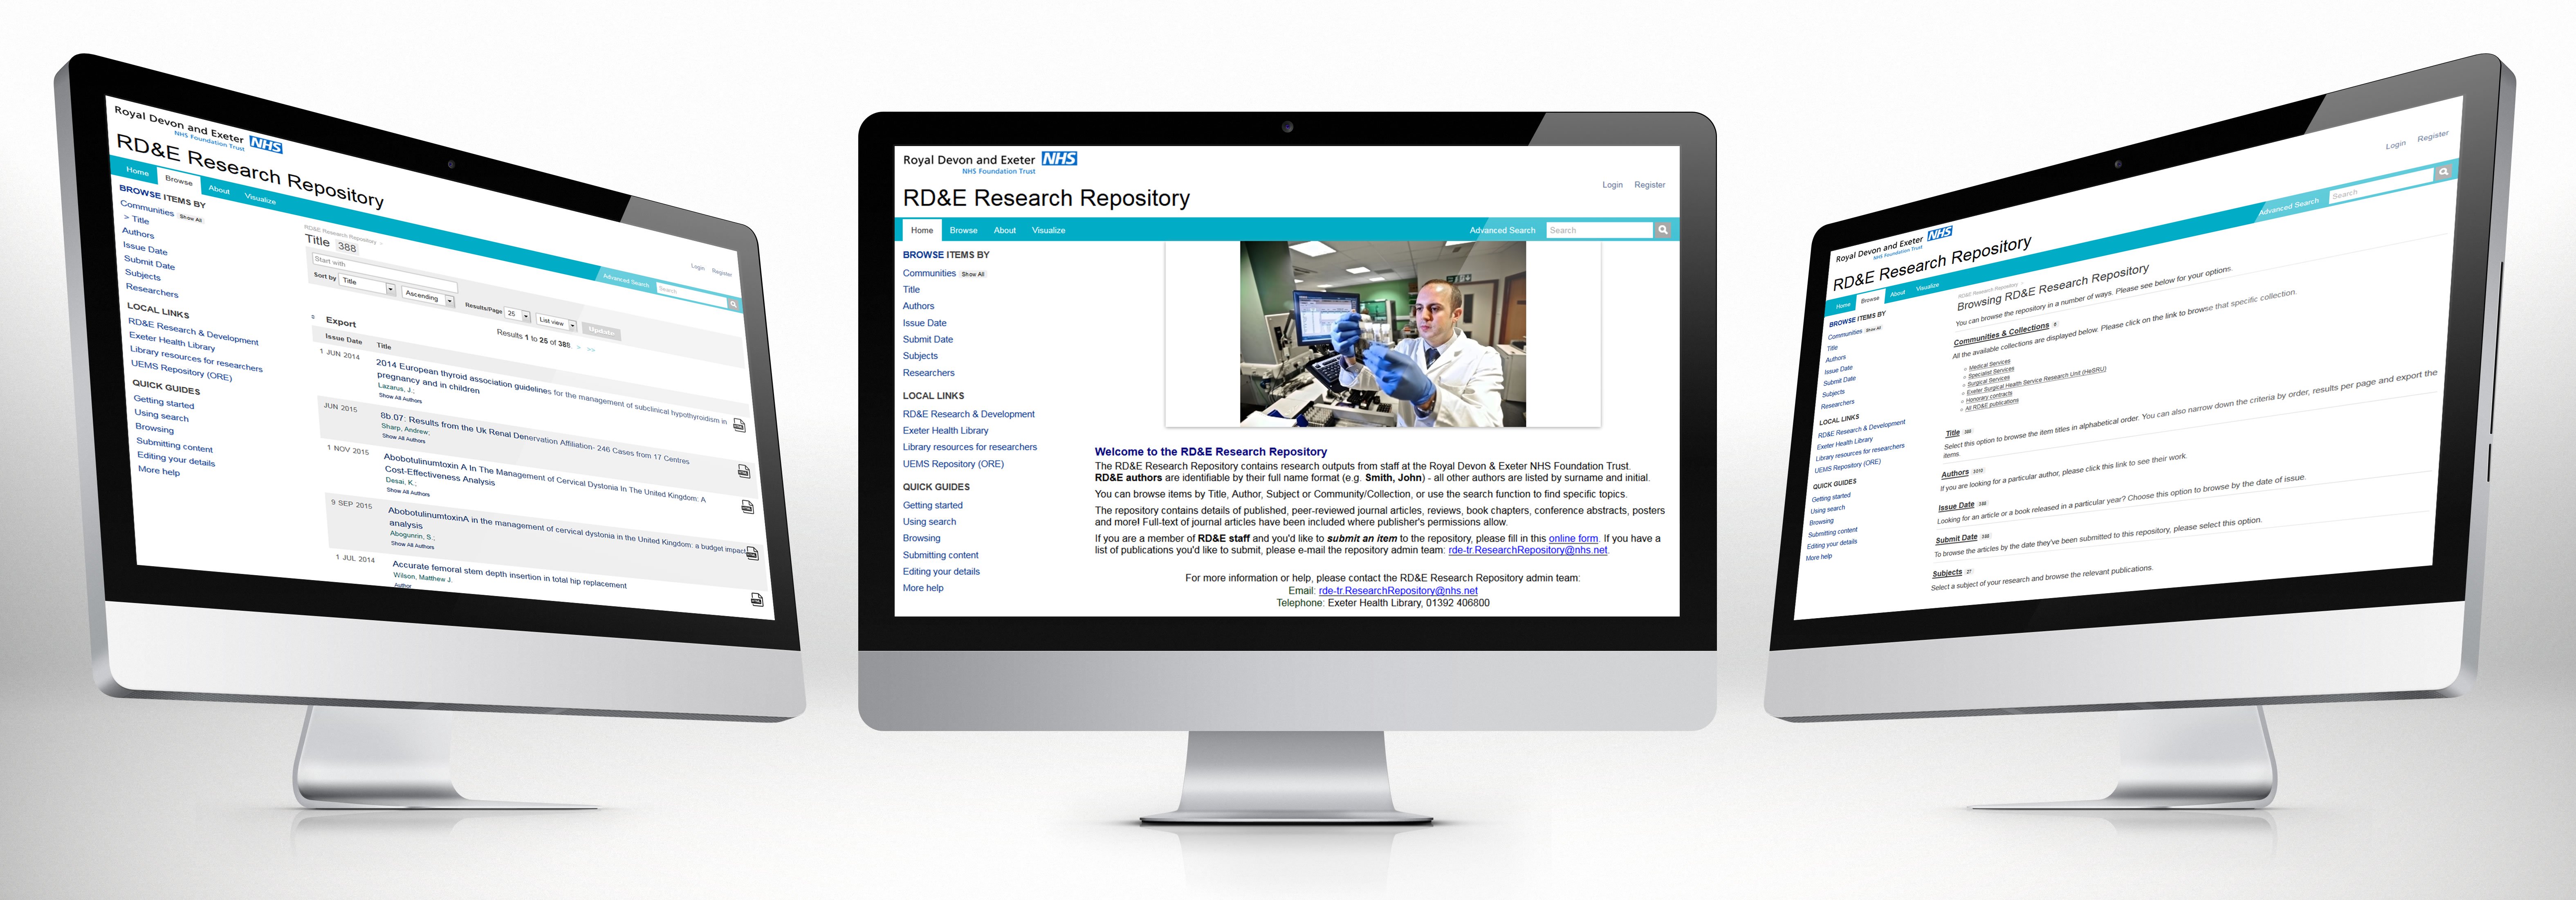 New research repository featured image